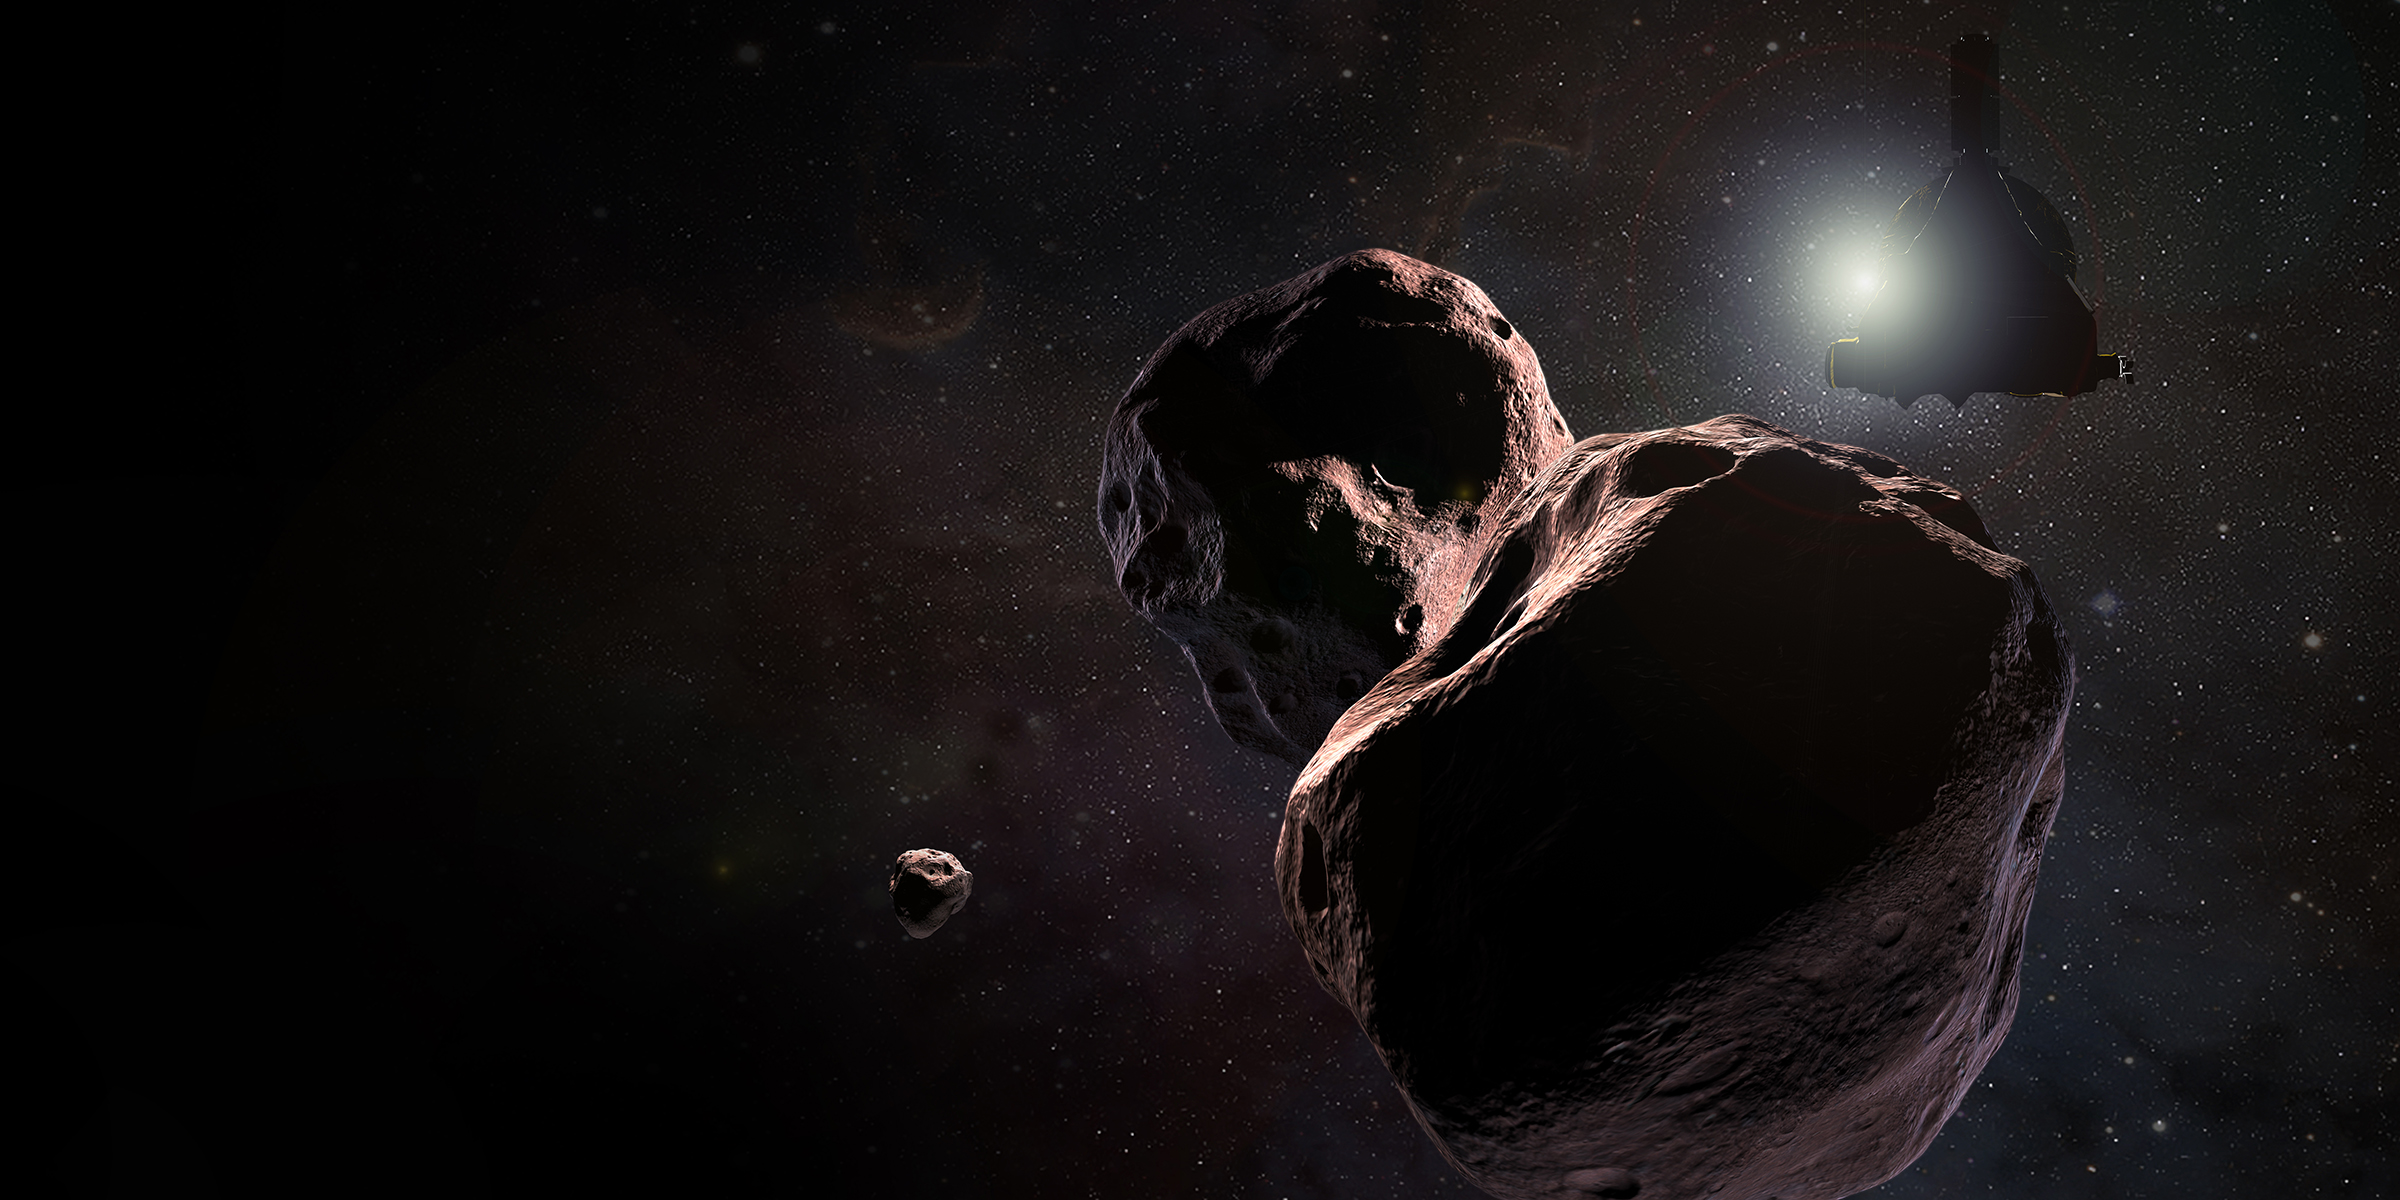 New Horizons probe will soon whiz past Ultima Thule, the farthest object visited by the humanity